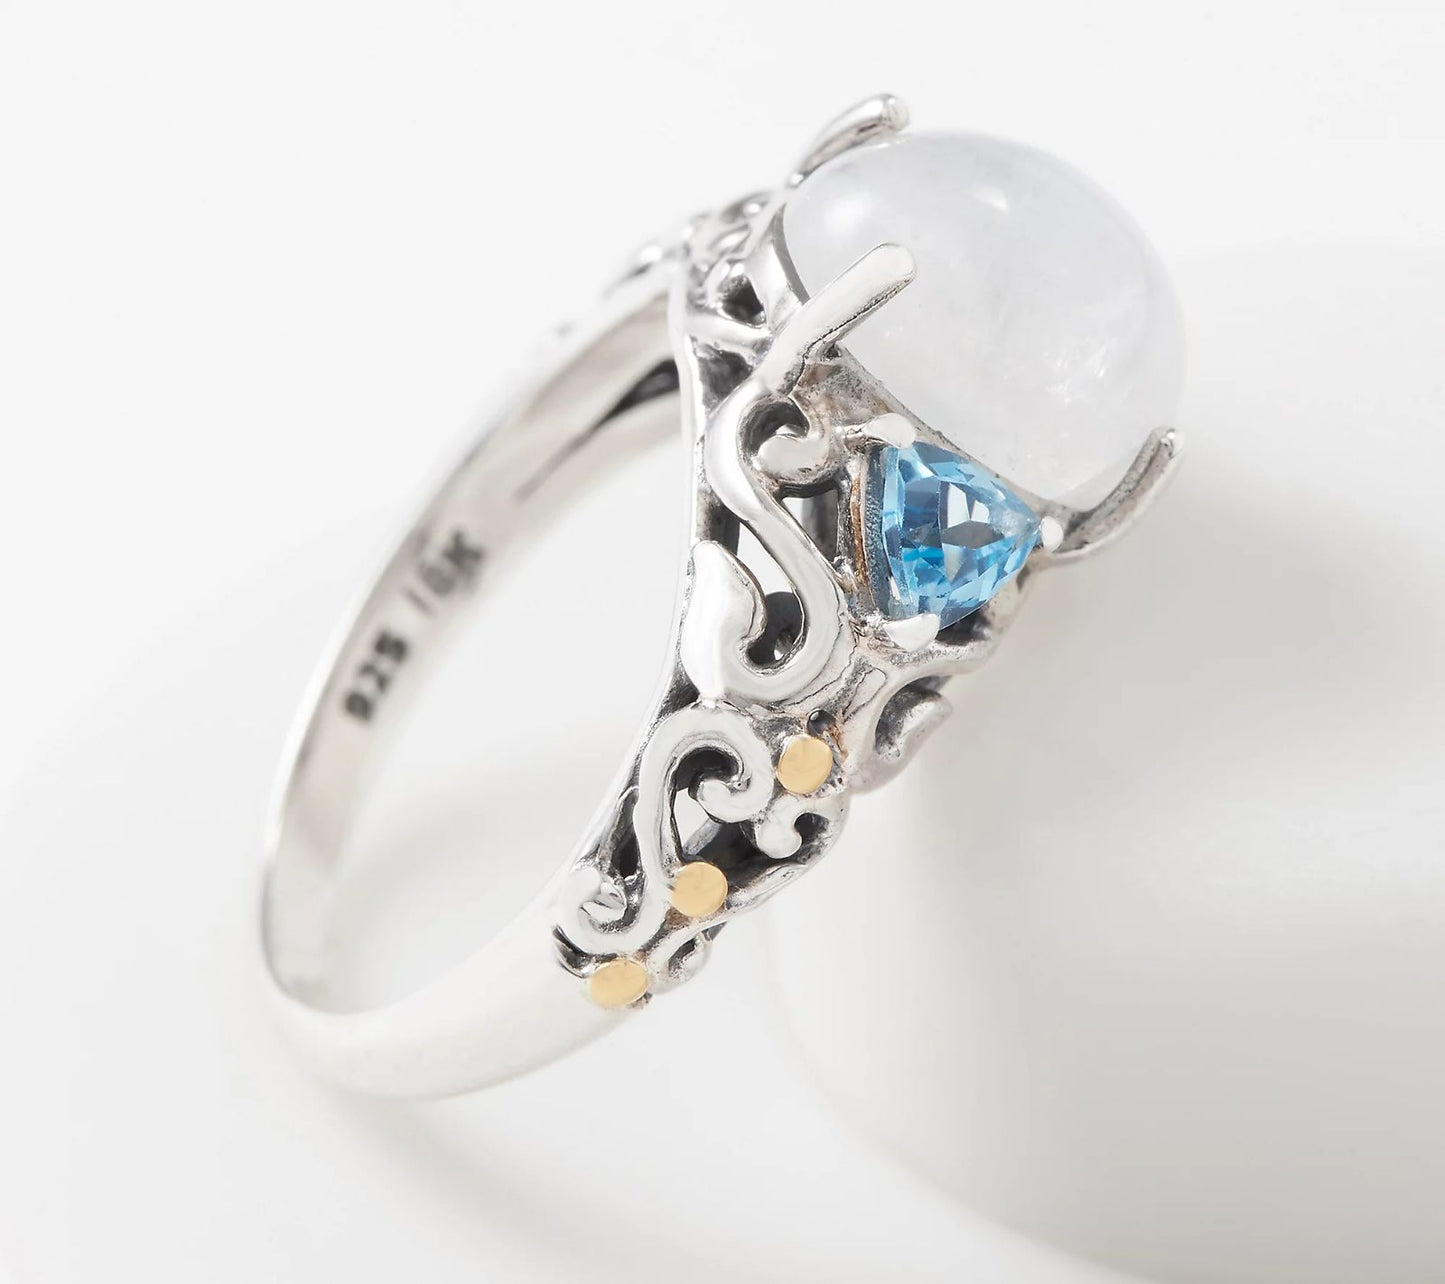 Artisan Crafted Moonstone, Blue Topaz Three Stone Ring, Size 6, Sterling Silver